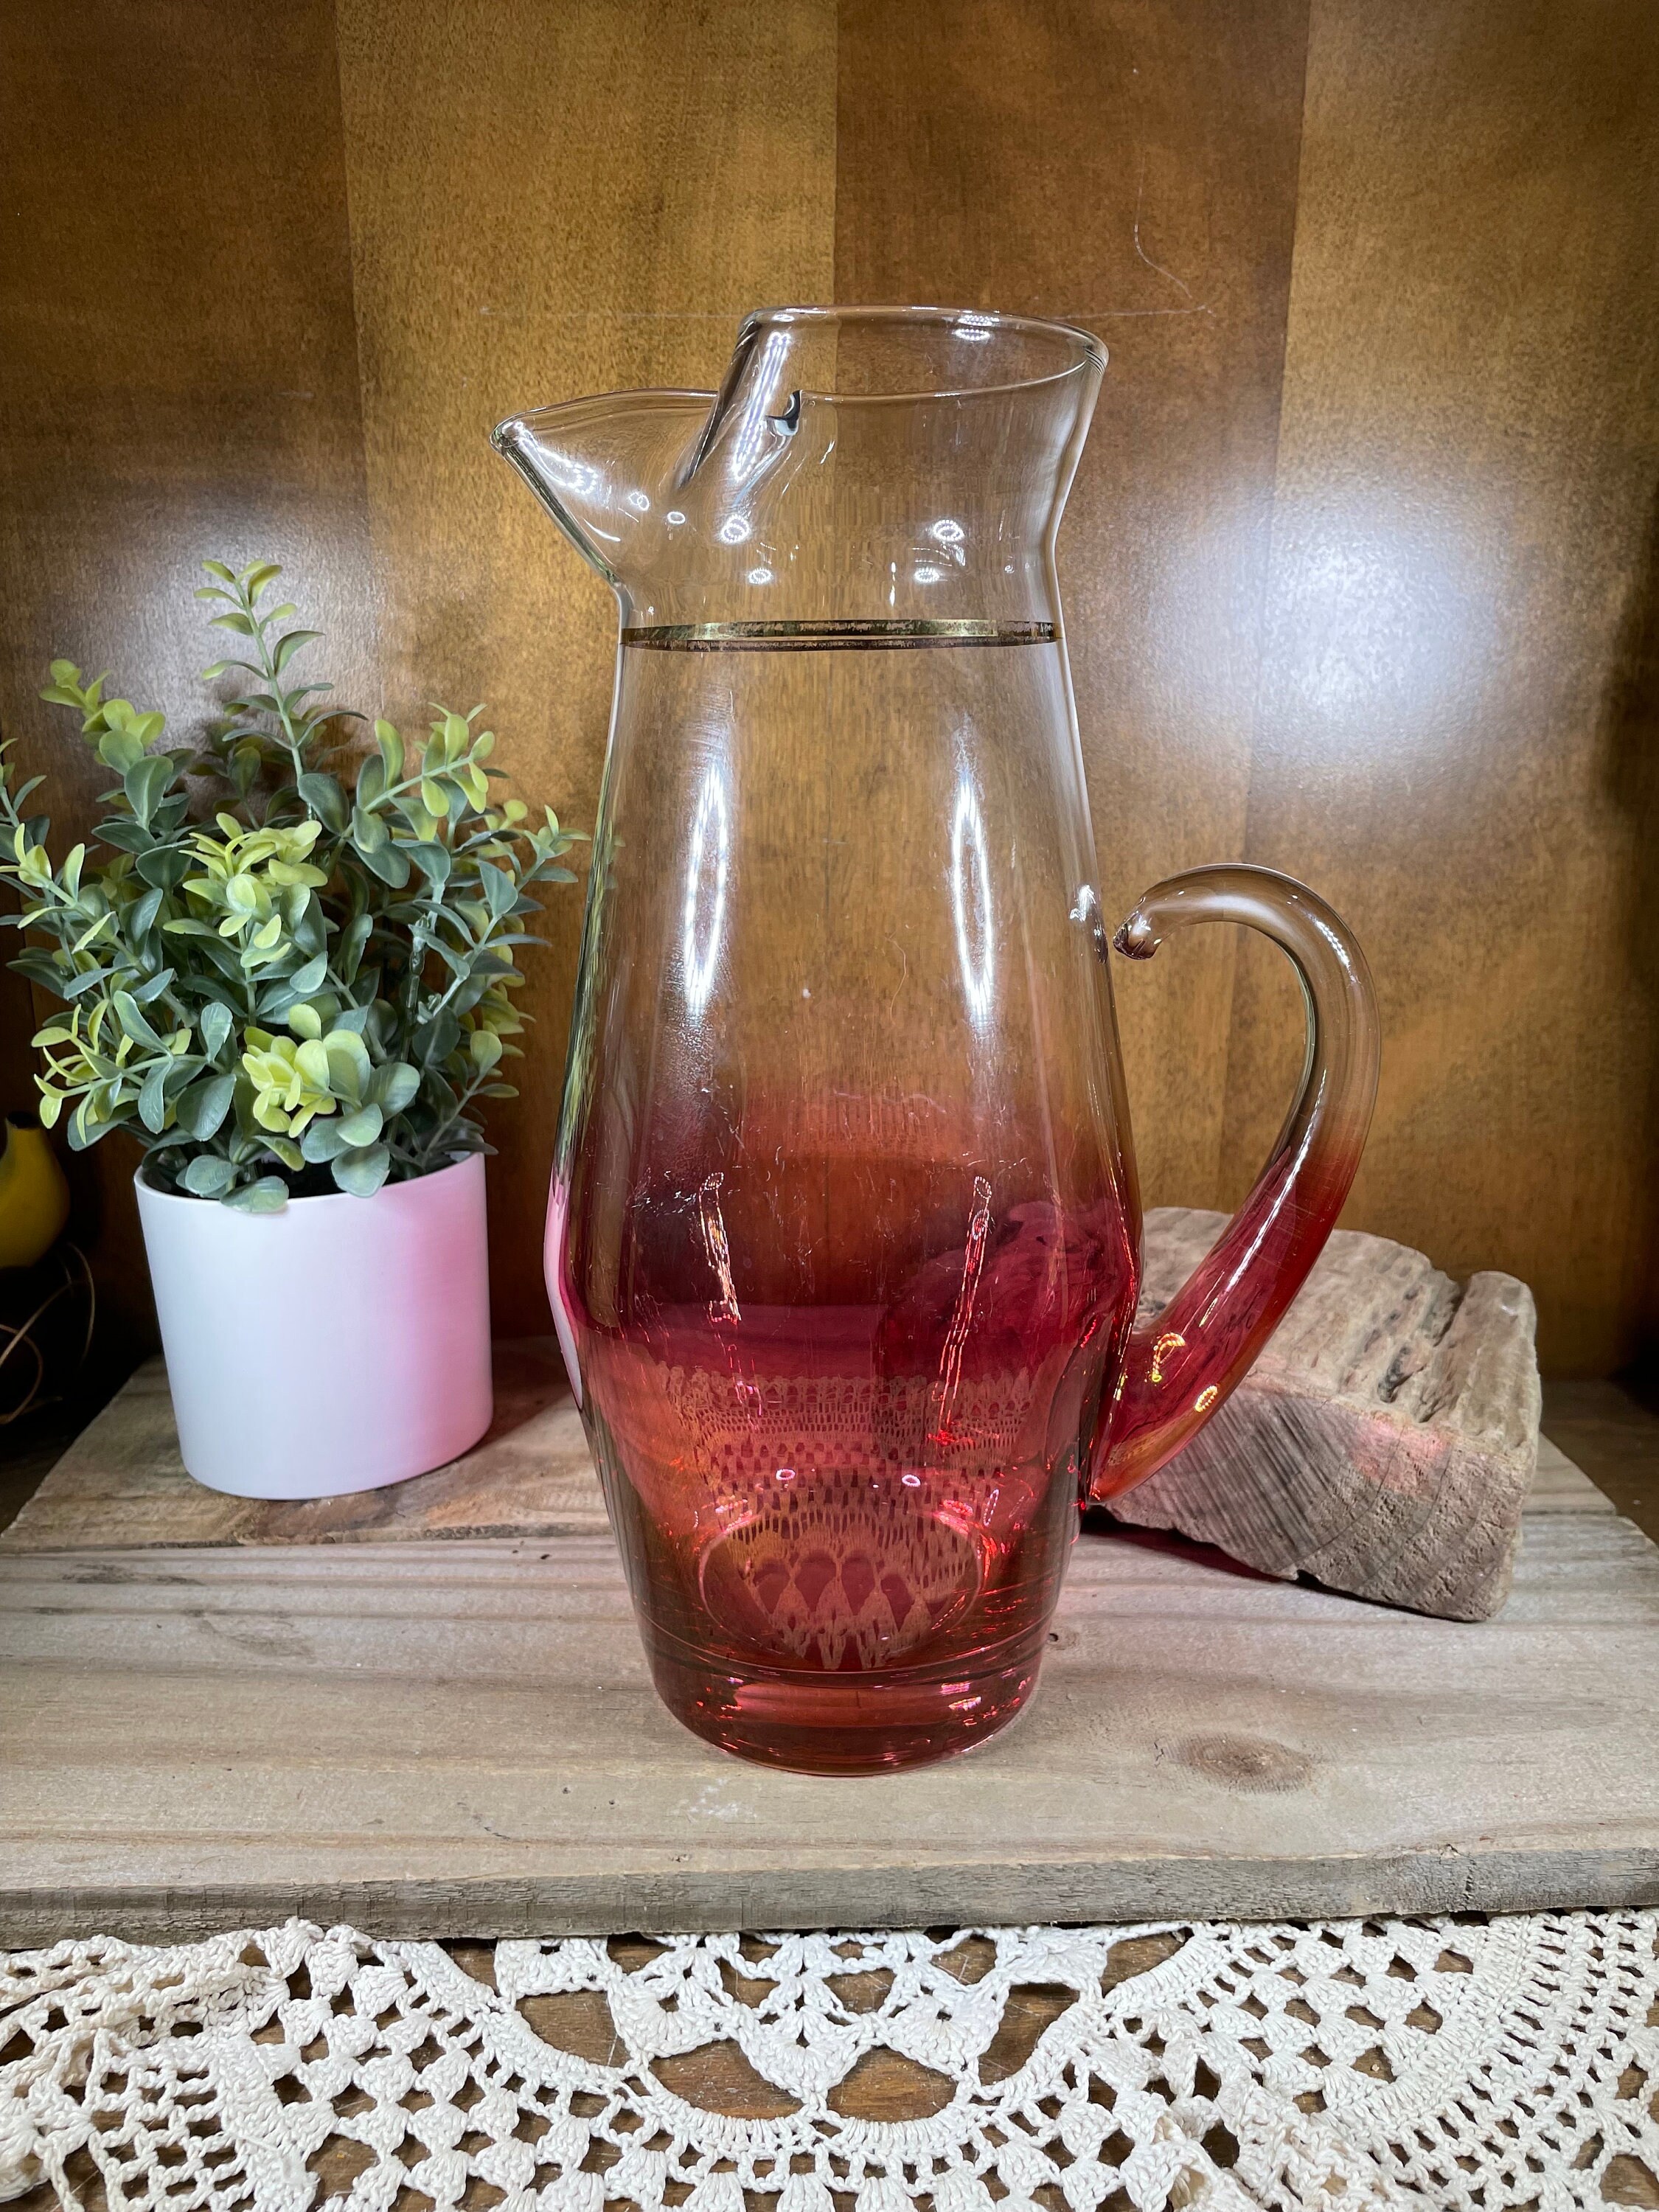 Red Co. Set of 2 Vintage Inspired 54 Oz Glass Pitcher Twist-Close Lid — Red  Co. Goods